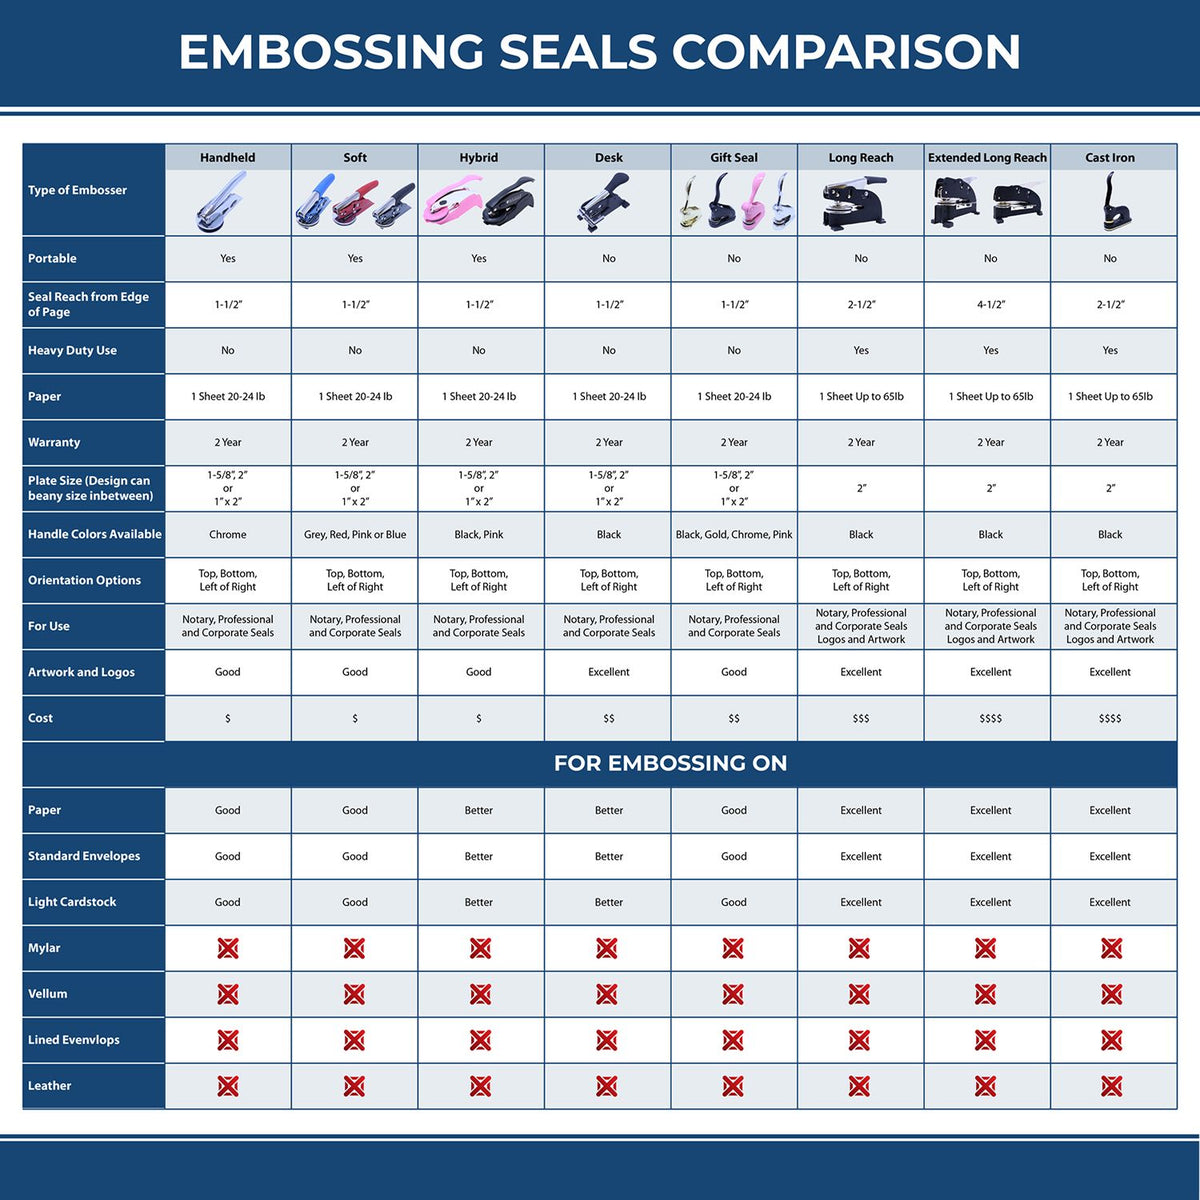 A comparison chart for the different types of mount models available for the Extended Long Reach Michigan Surveyor Embosser.